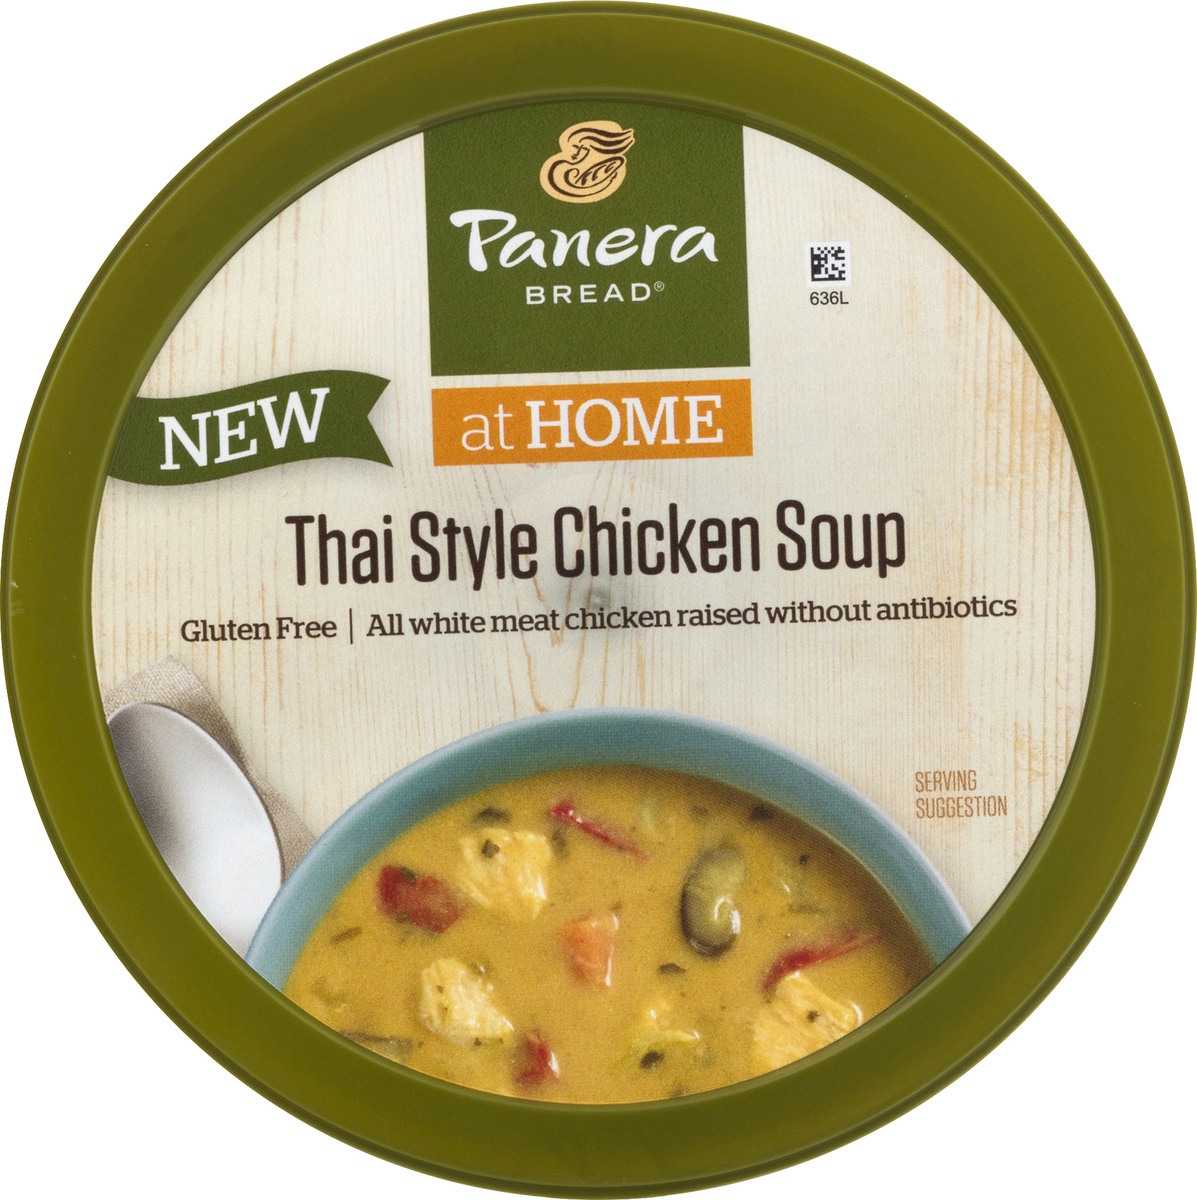 Panera Bread Thai Style Chicken Soup, 16 OZ Soup Cup (Gluten Free) 16 oz, Hot Food and Prepared